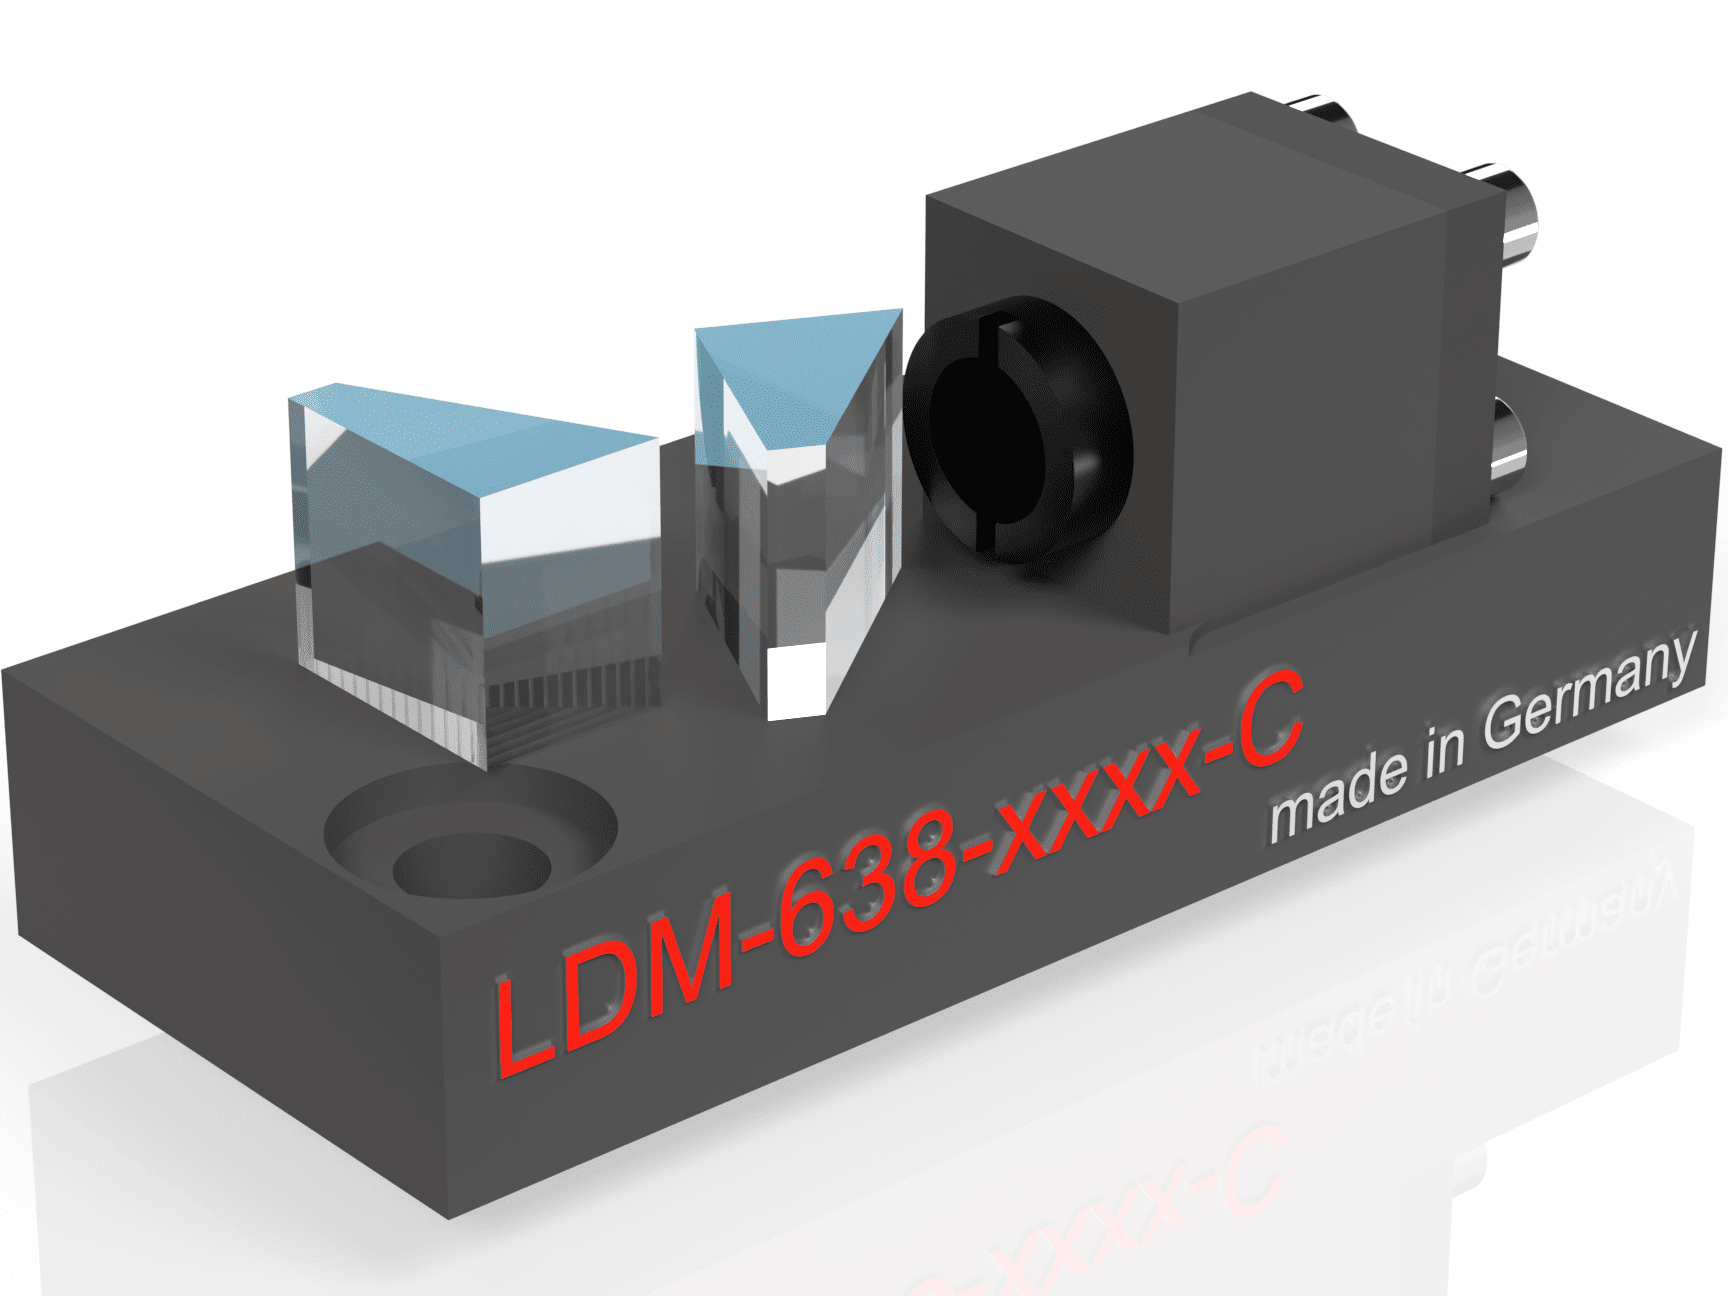 Picture of 700mW 638nm Diode Laser